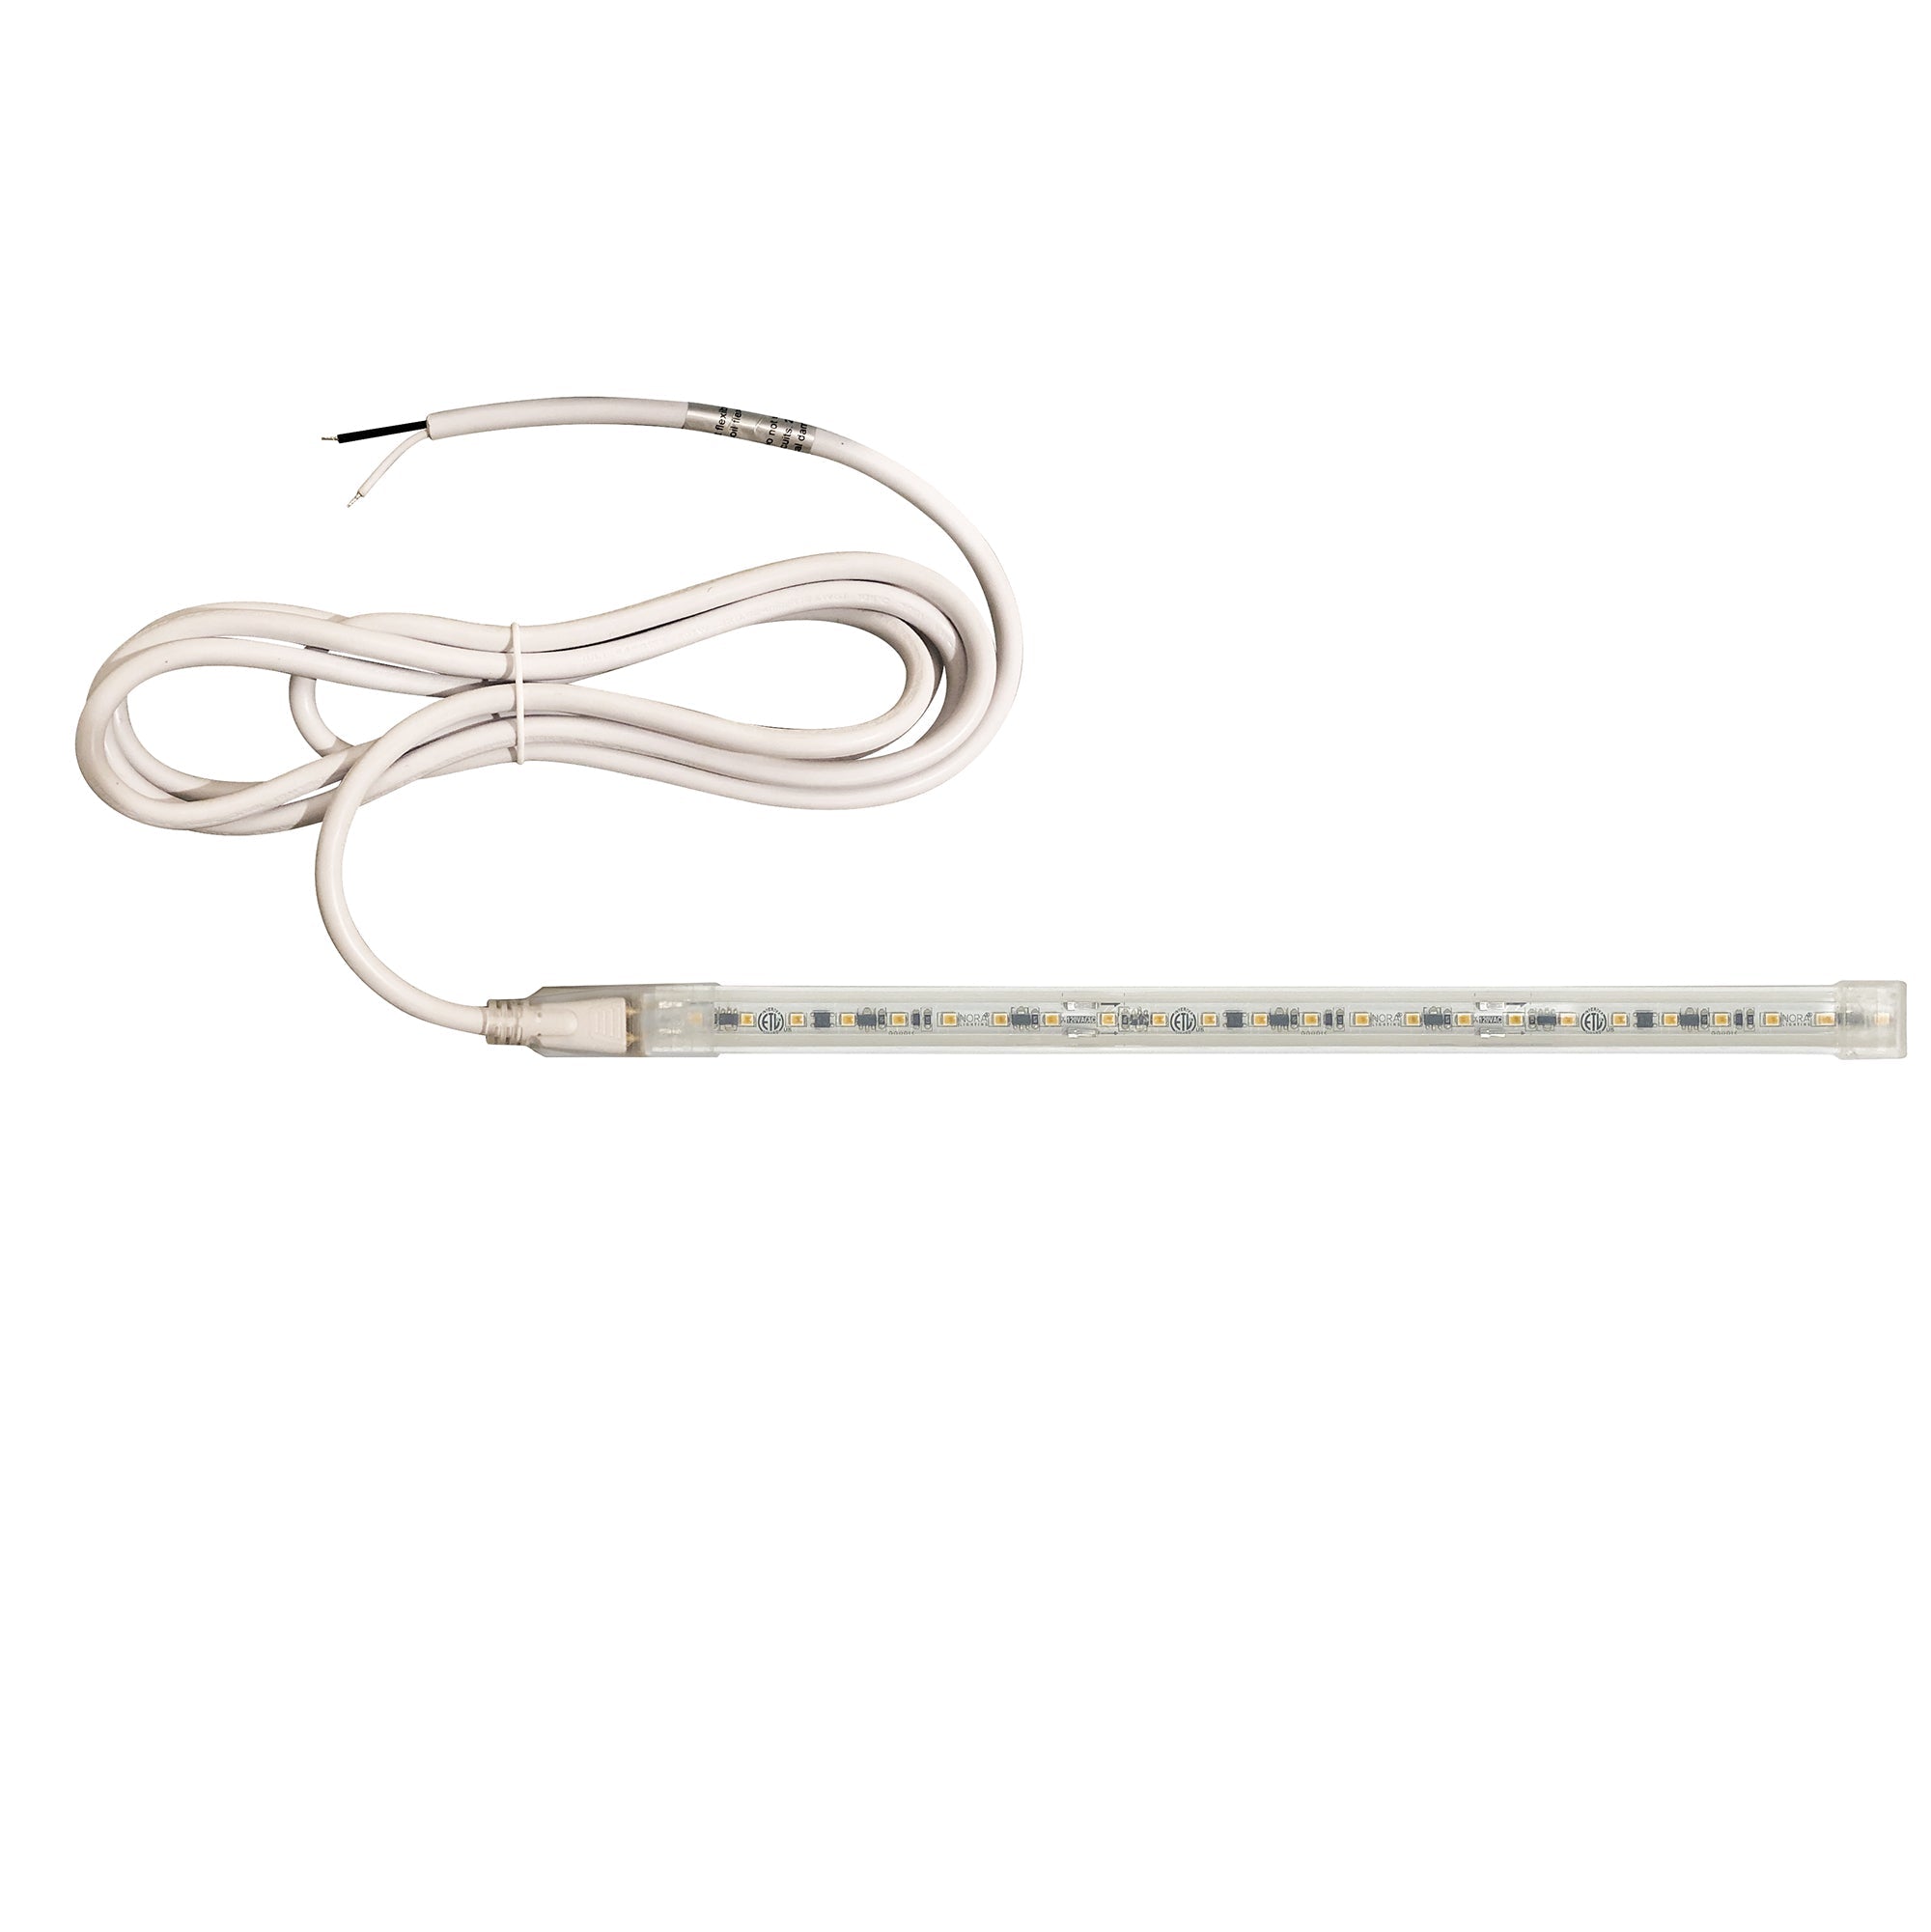 Nora Lighting NUTP13-W9-12-927/HW - Accent / Undercabinet - Custom Cut 9-ft 120V Continuous LED Tape Light, 330lm / 3.6W per foot, 2700K, w/ Mounting Clips and 8' Hardwired Power Cord